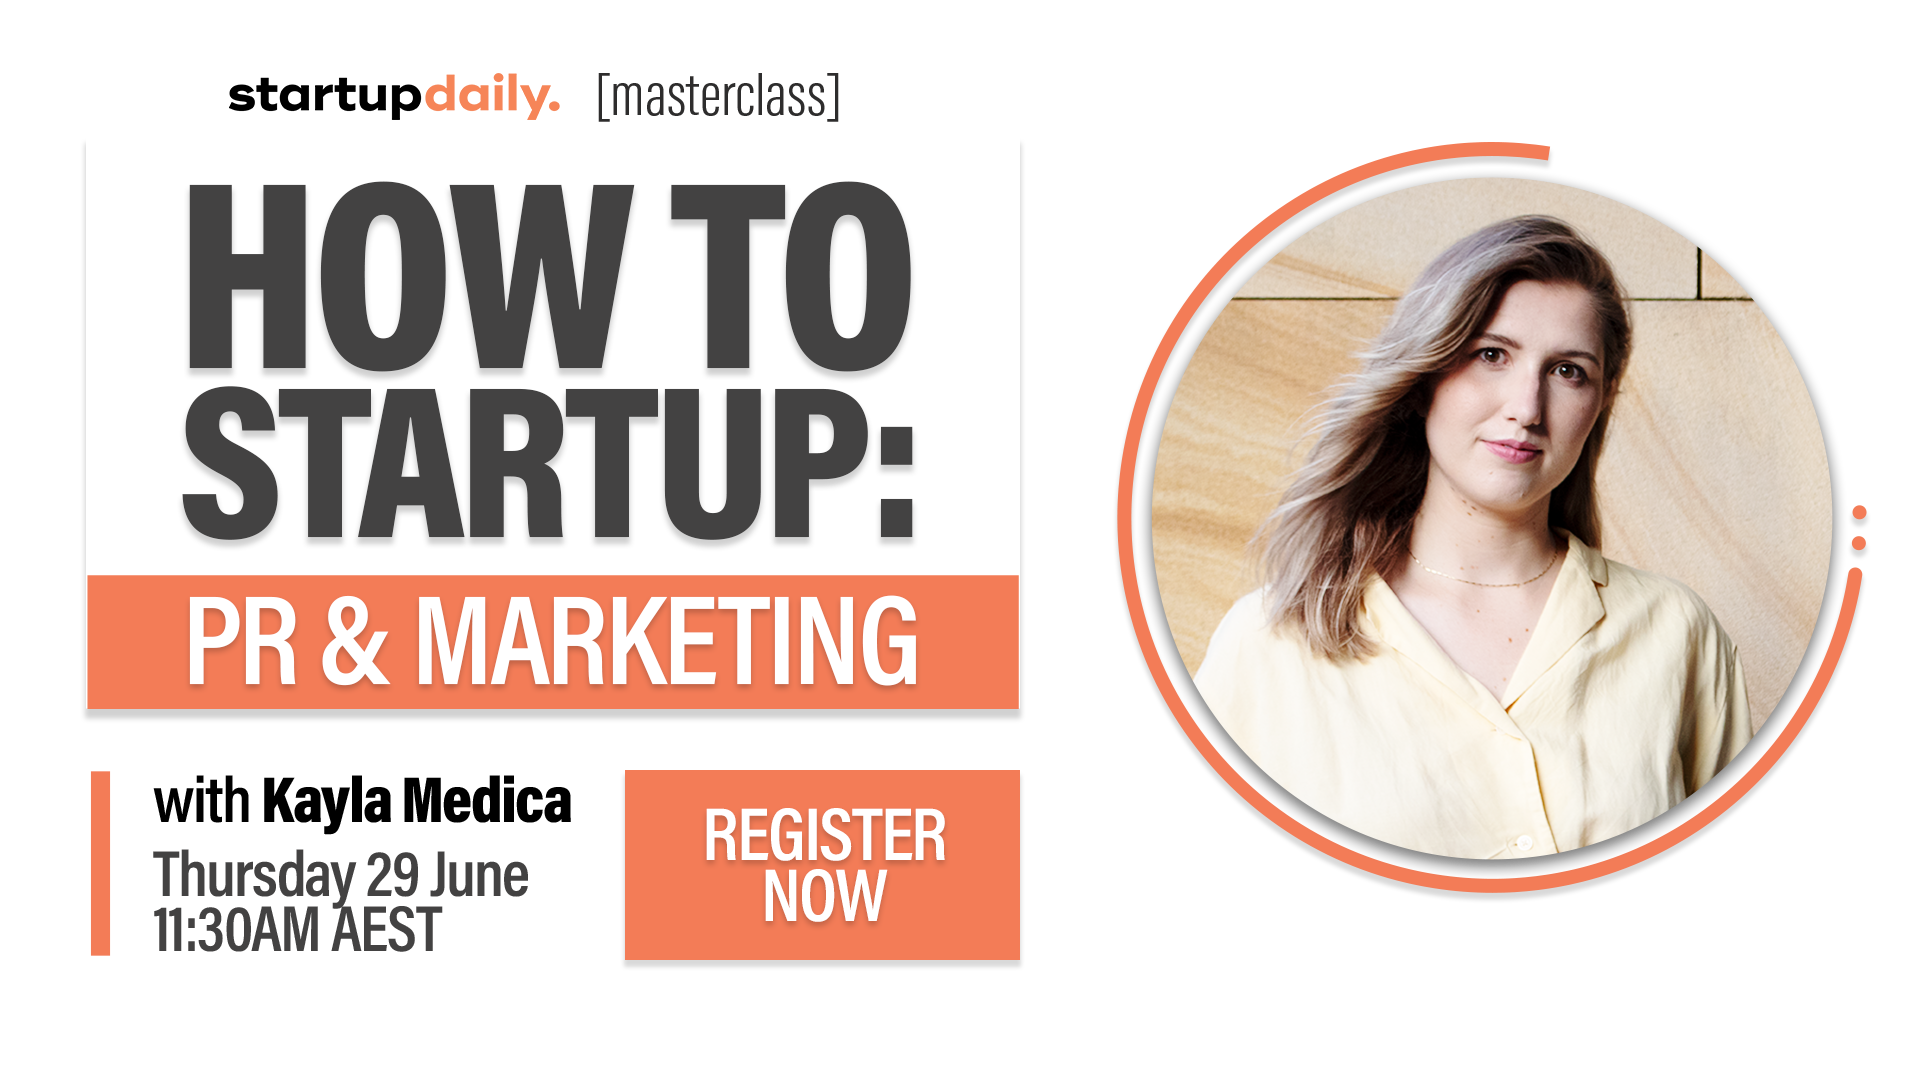 Startup Daily masterclass - How To Startup: PR & Marketing with Kayla Medica